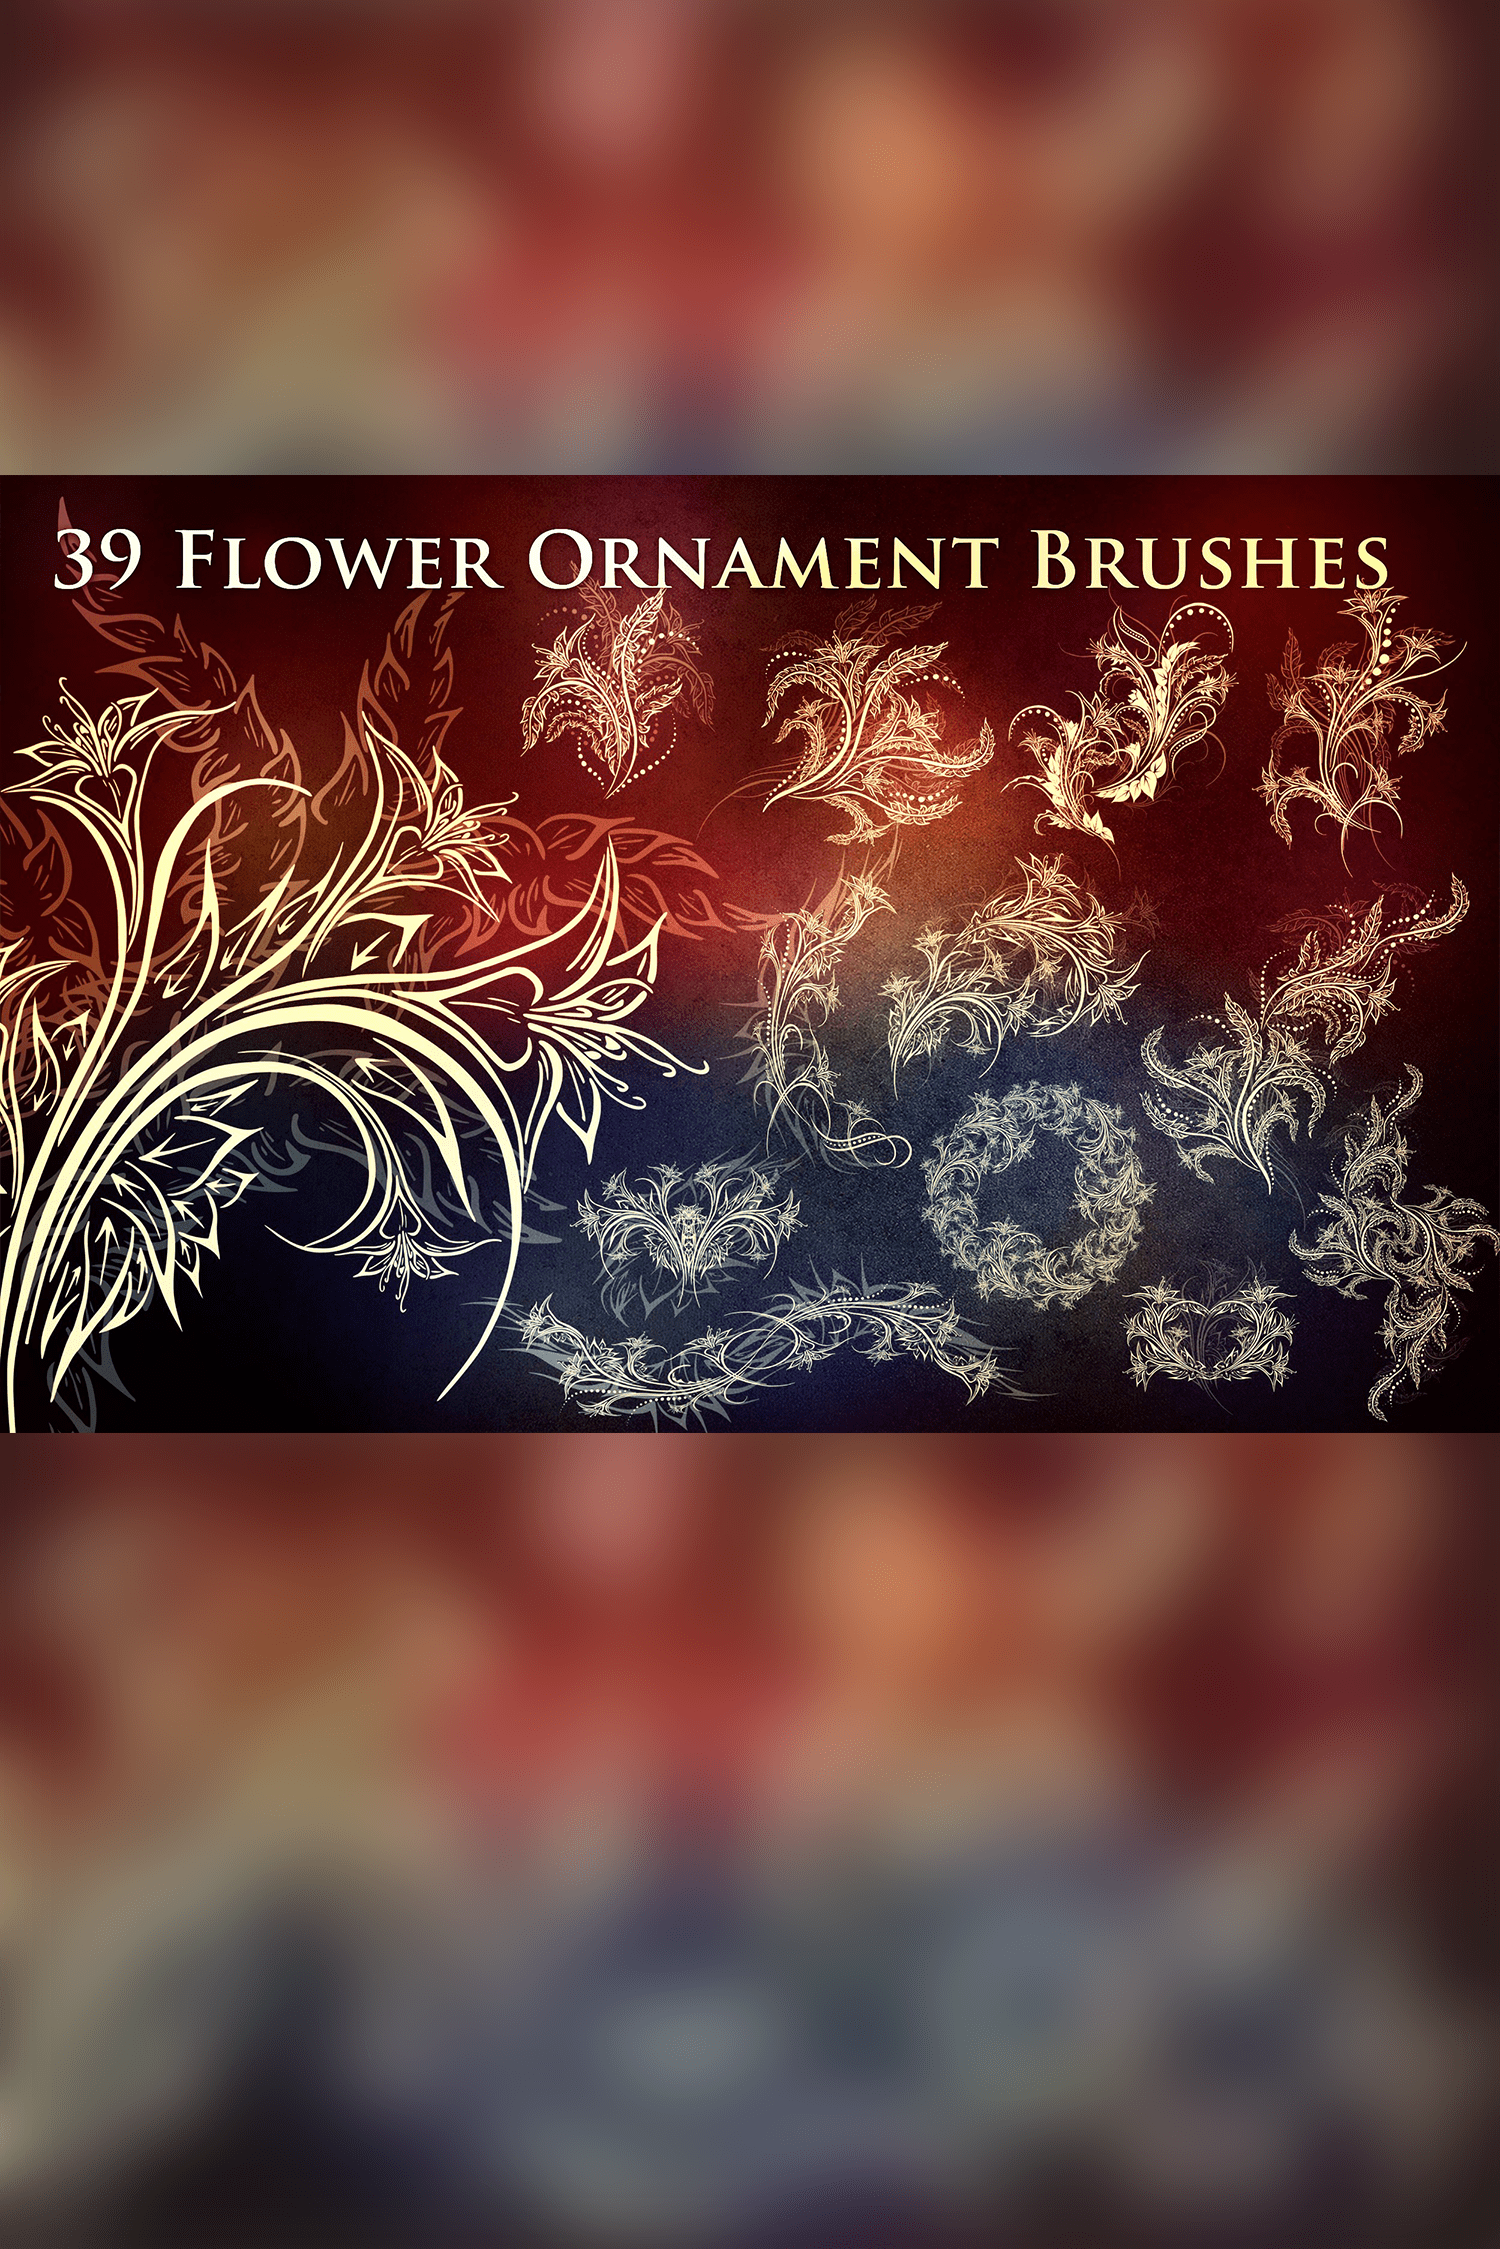 2500+ Procreate Brushes Ultimate Bundle by Reto Scheiwiller